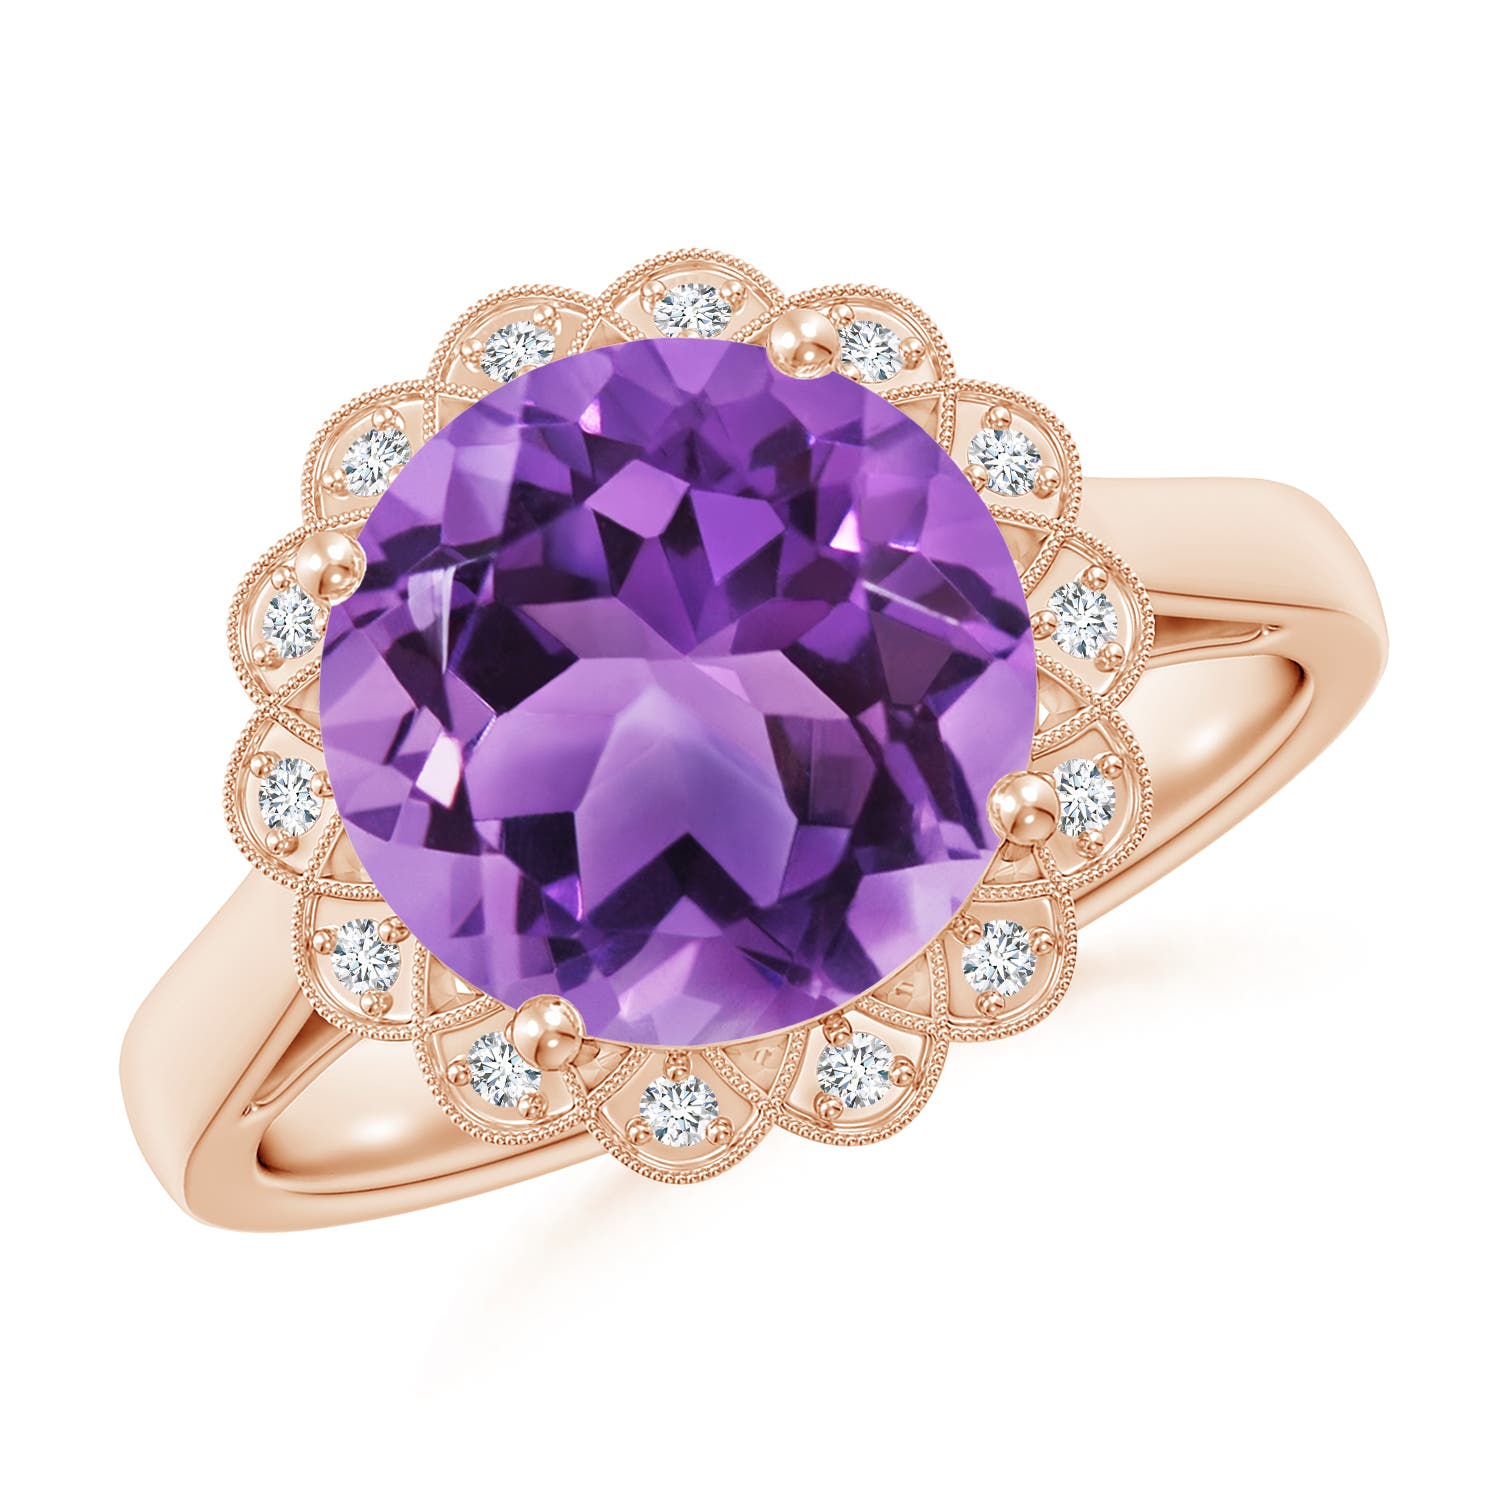 AA - Amethyst / 3.28 CT / 14 KT Rose Gold